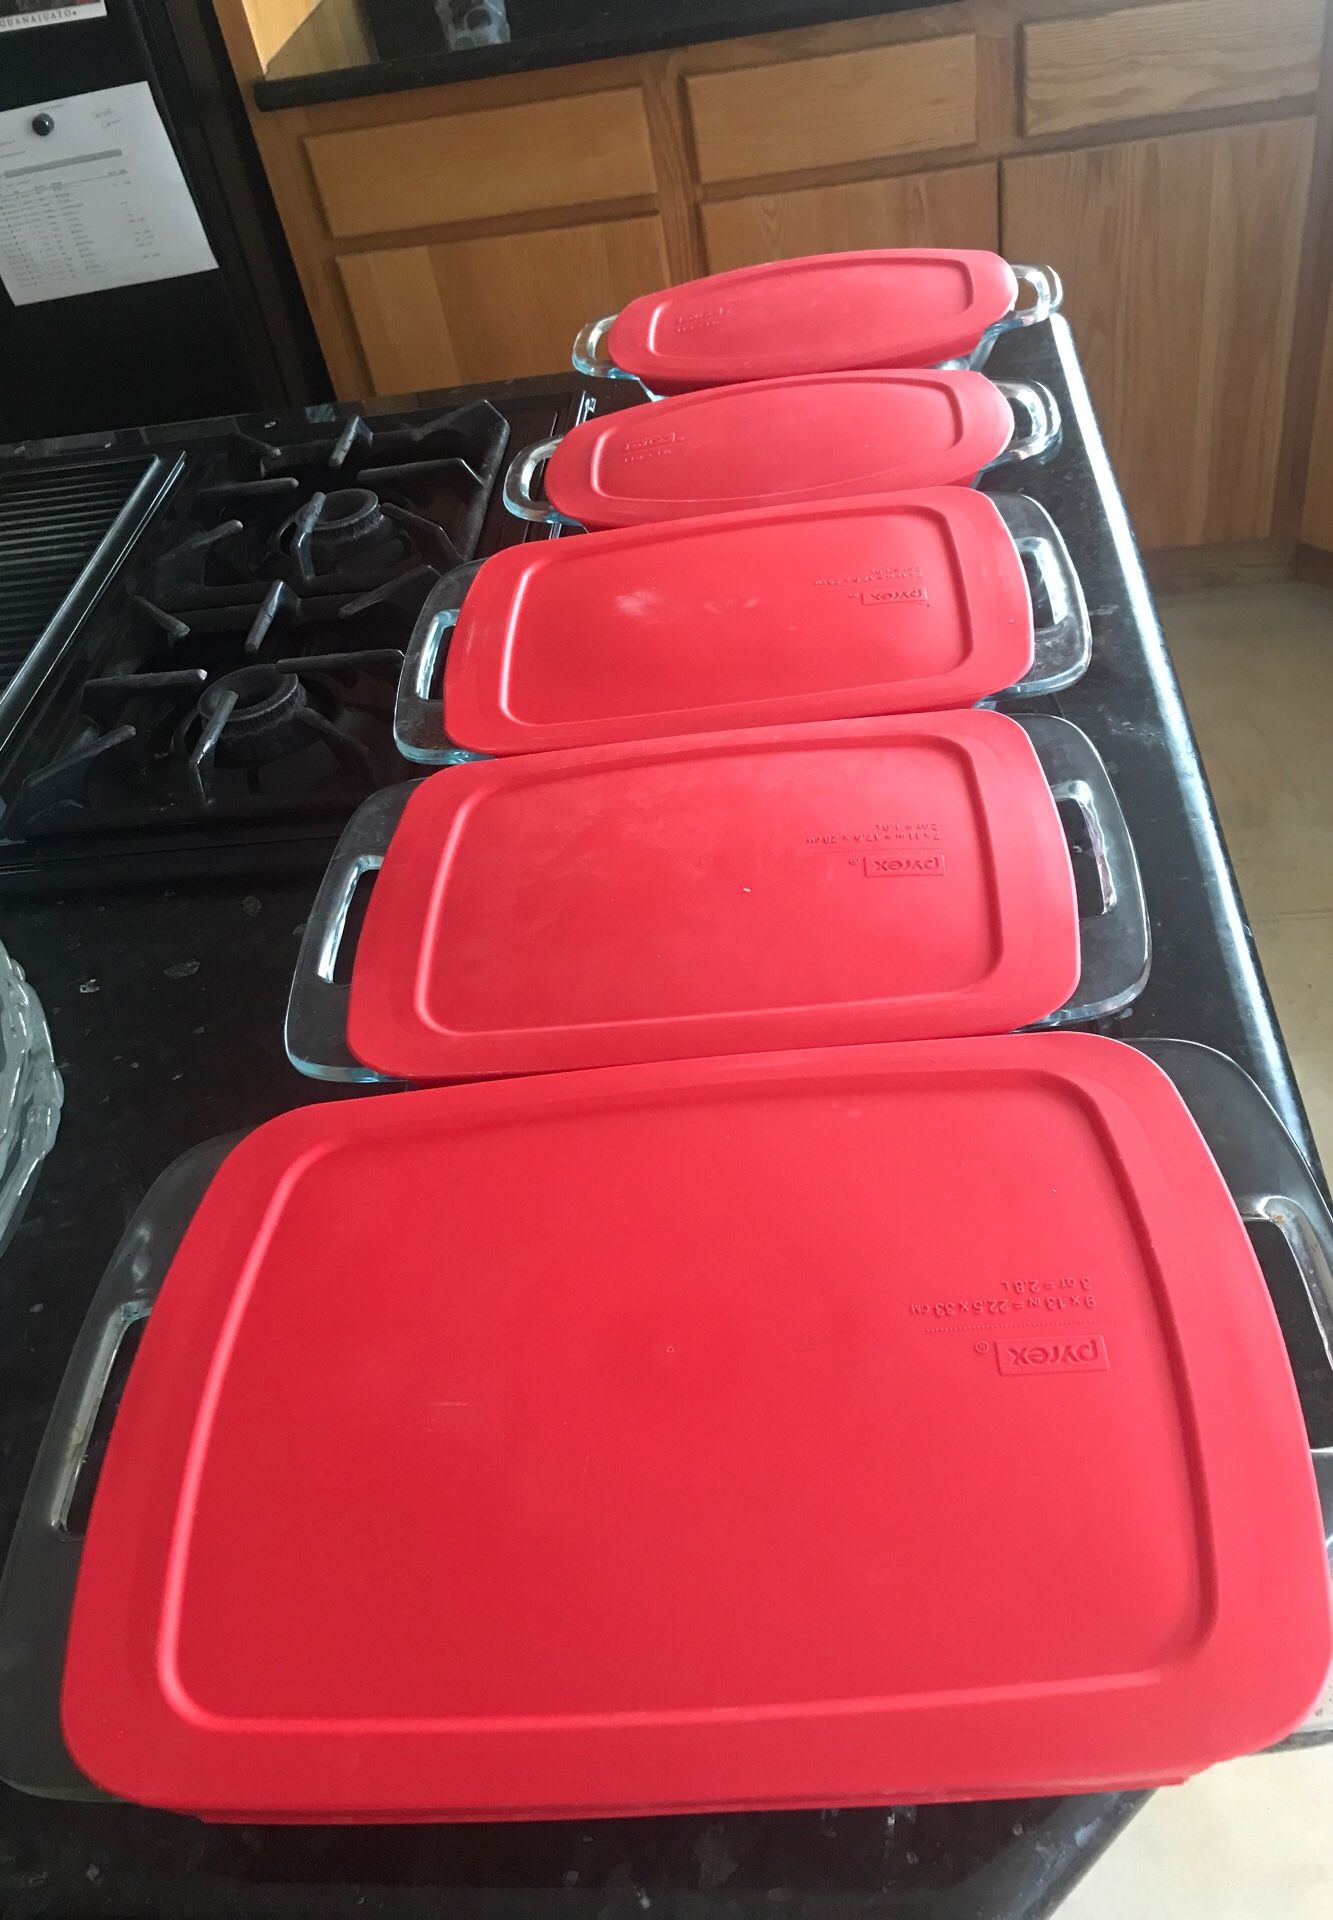 Moving out of country....selling 5 Glass Pyrex / with lids